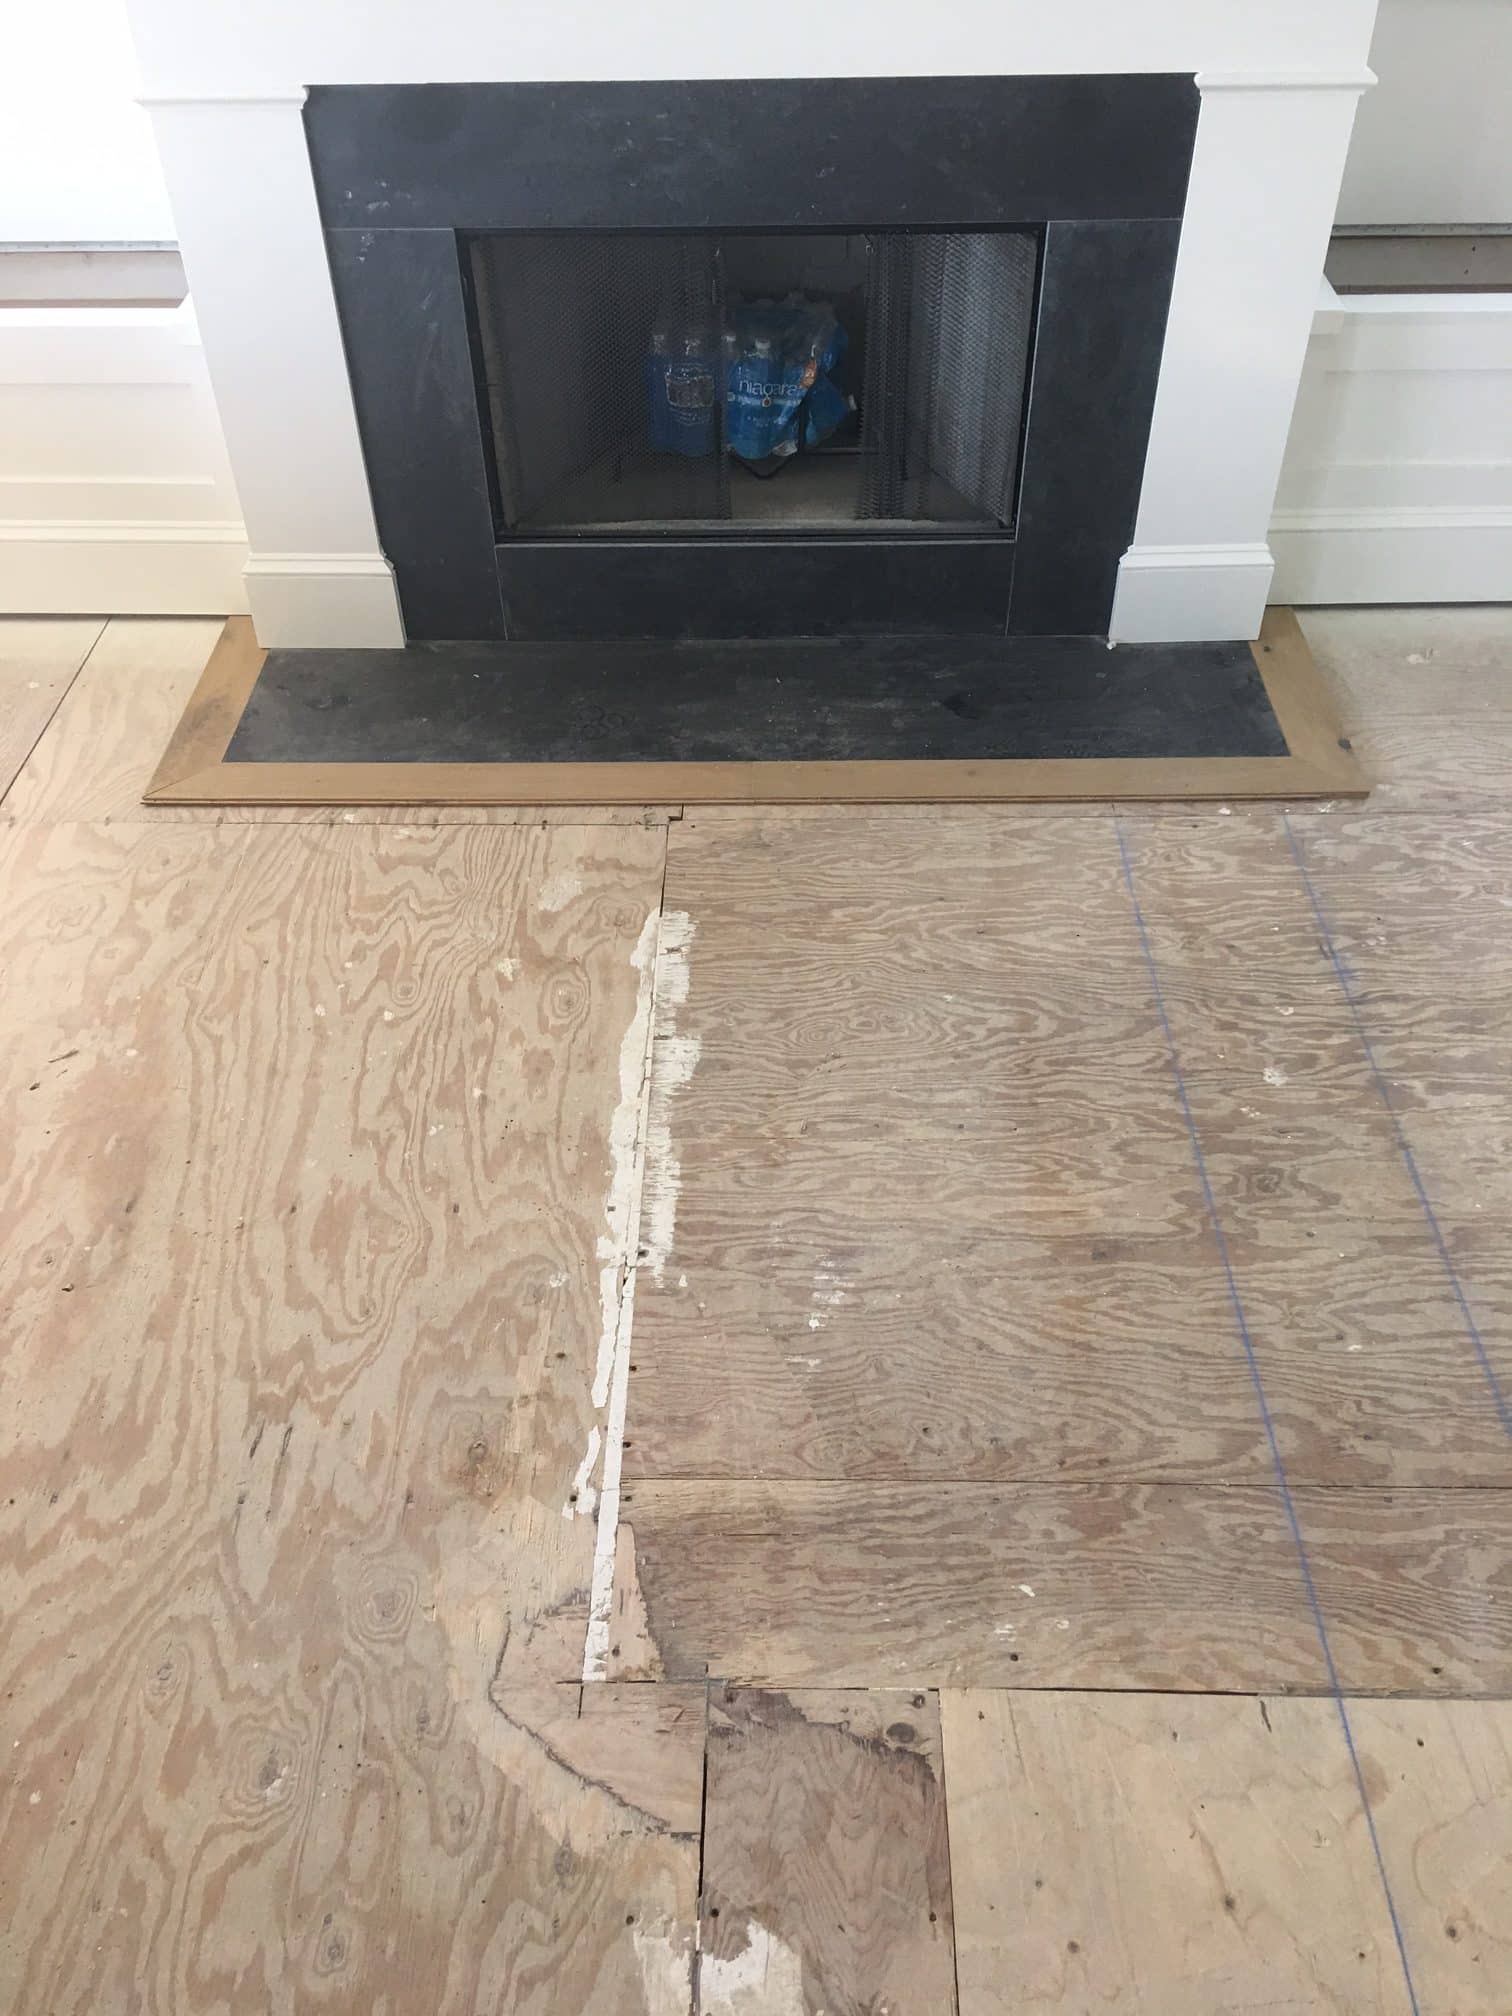 Wooden floor with a white and black chimney on the wall